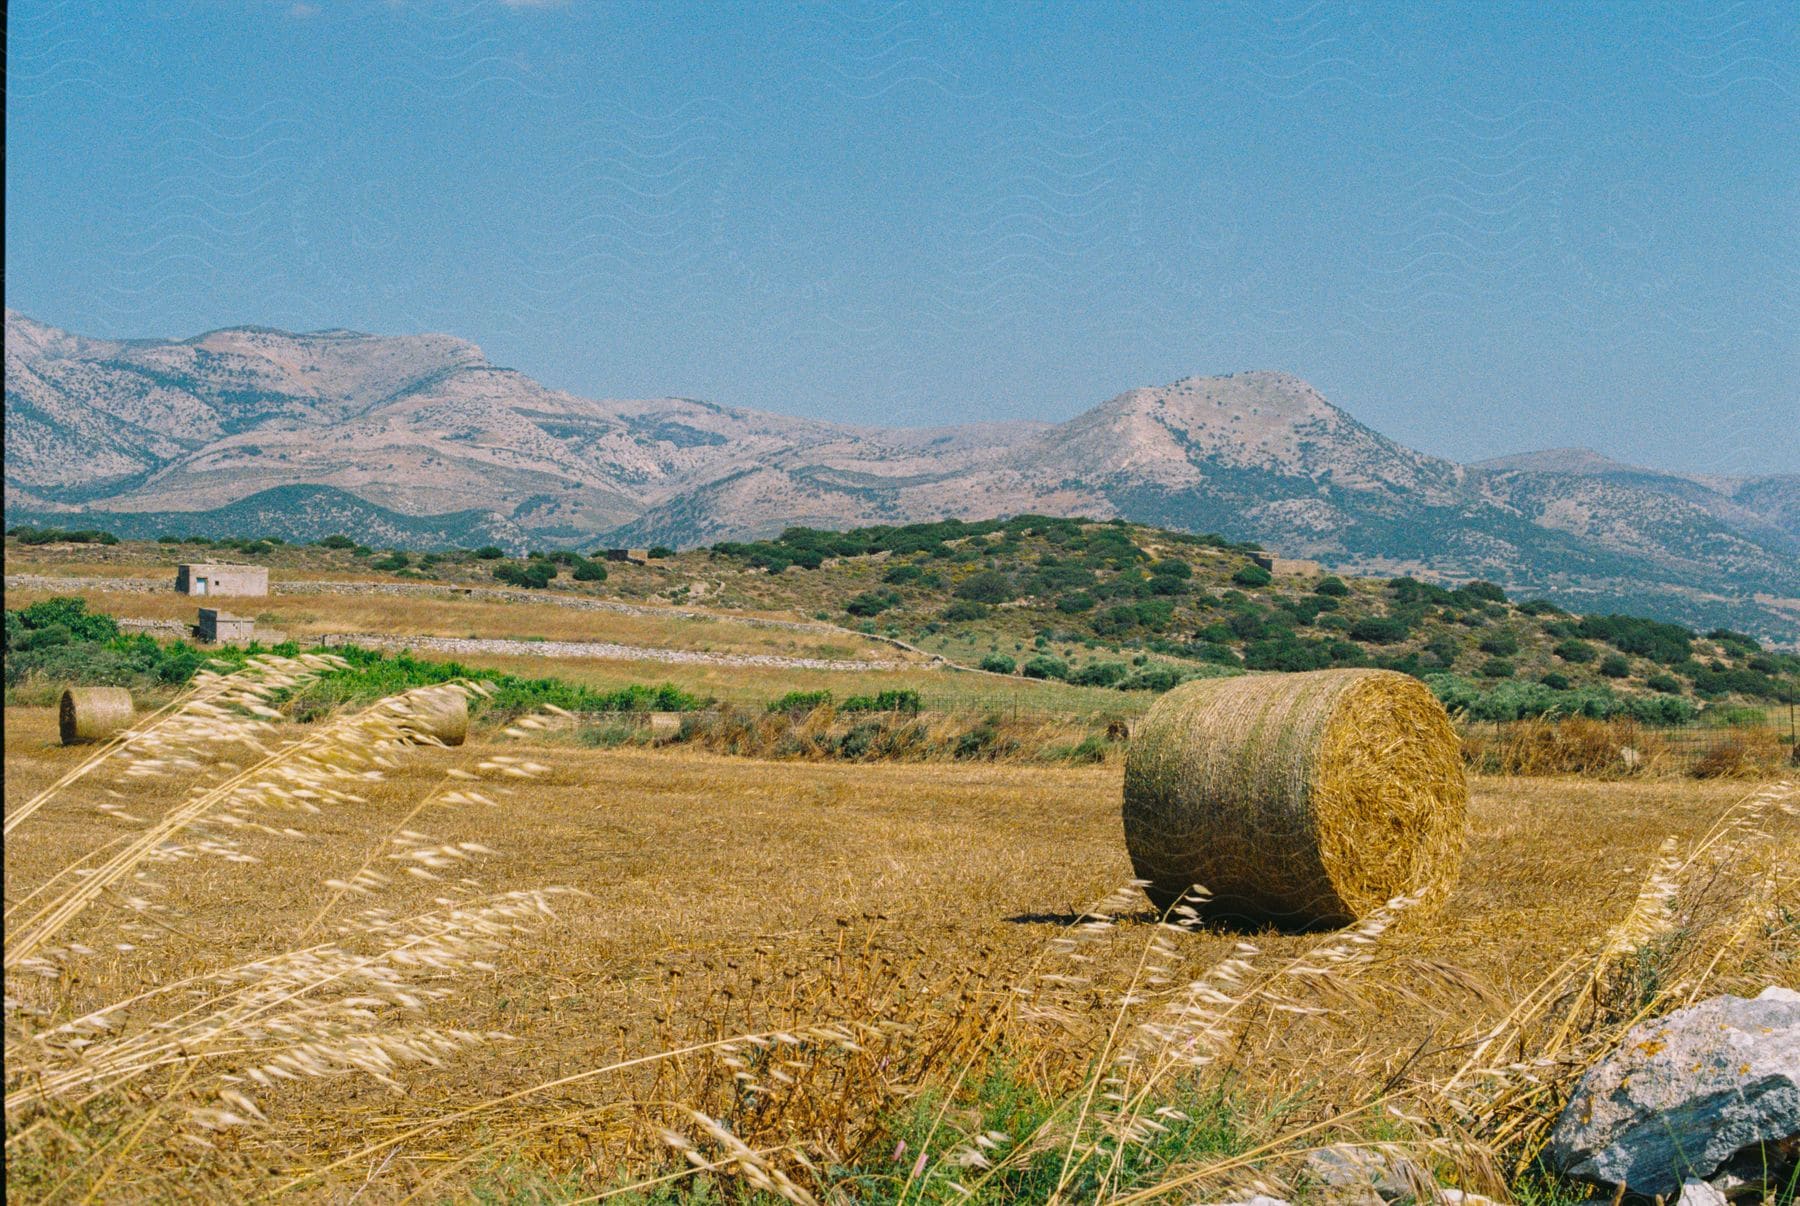 Bales of hay sit on open farmland with a house and mountains in the distance